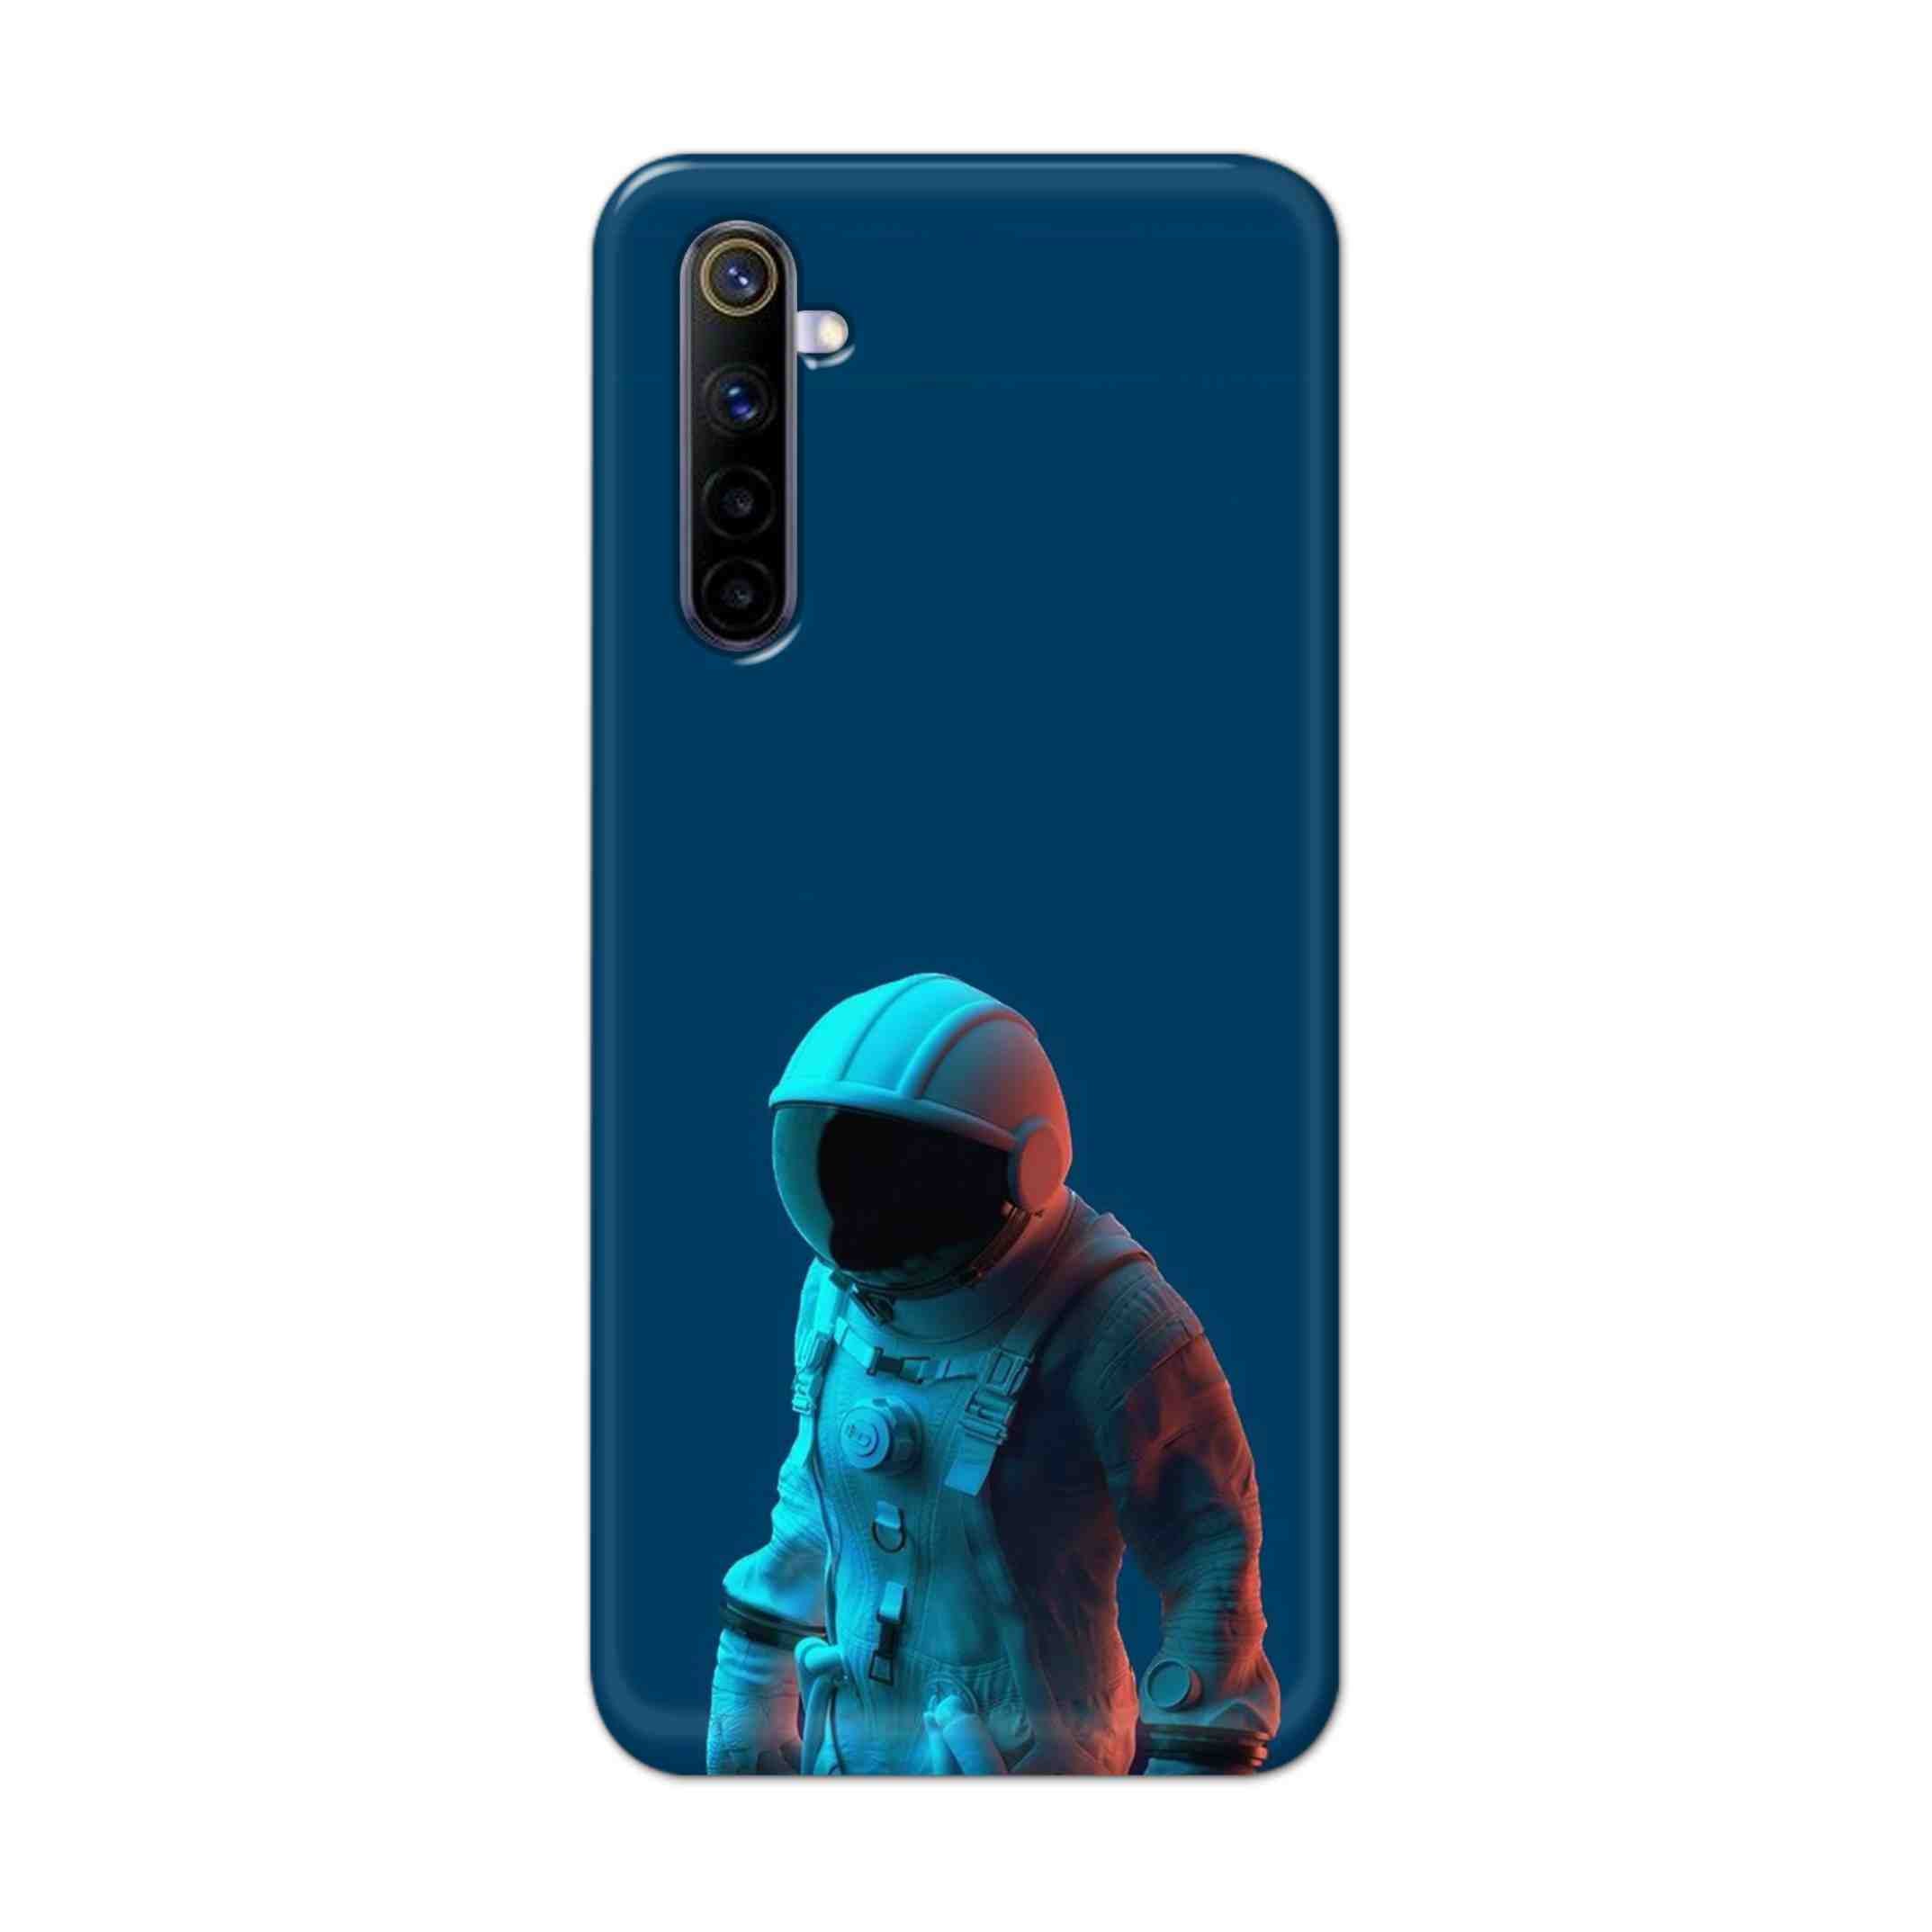 Buy Blue Astronaut Hard Back Mobile Phone Case Cover For REALME 6 Online